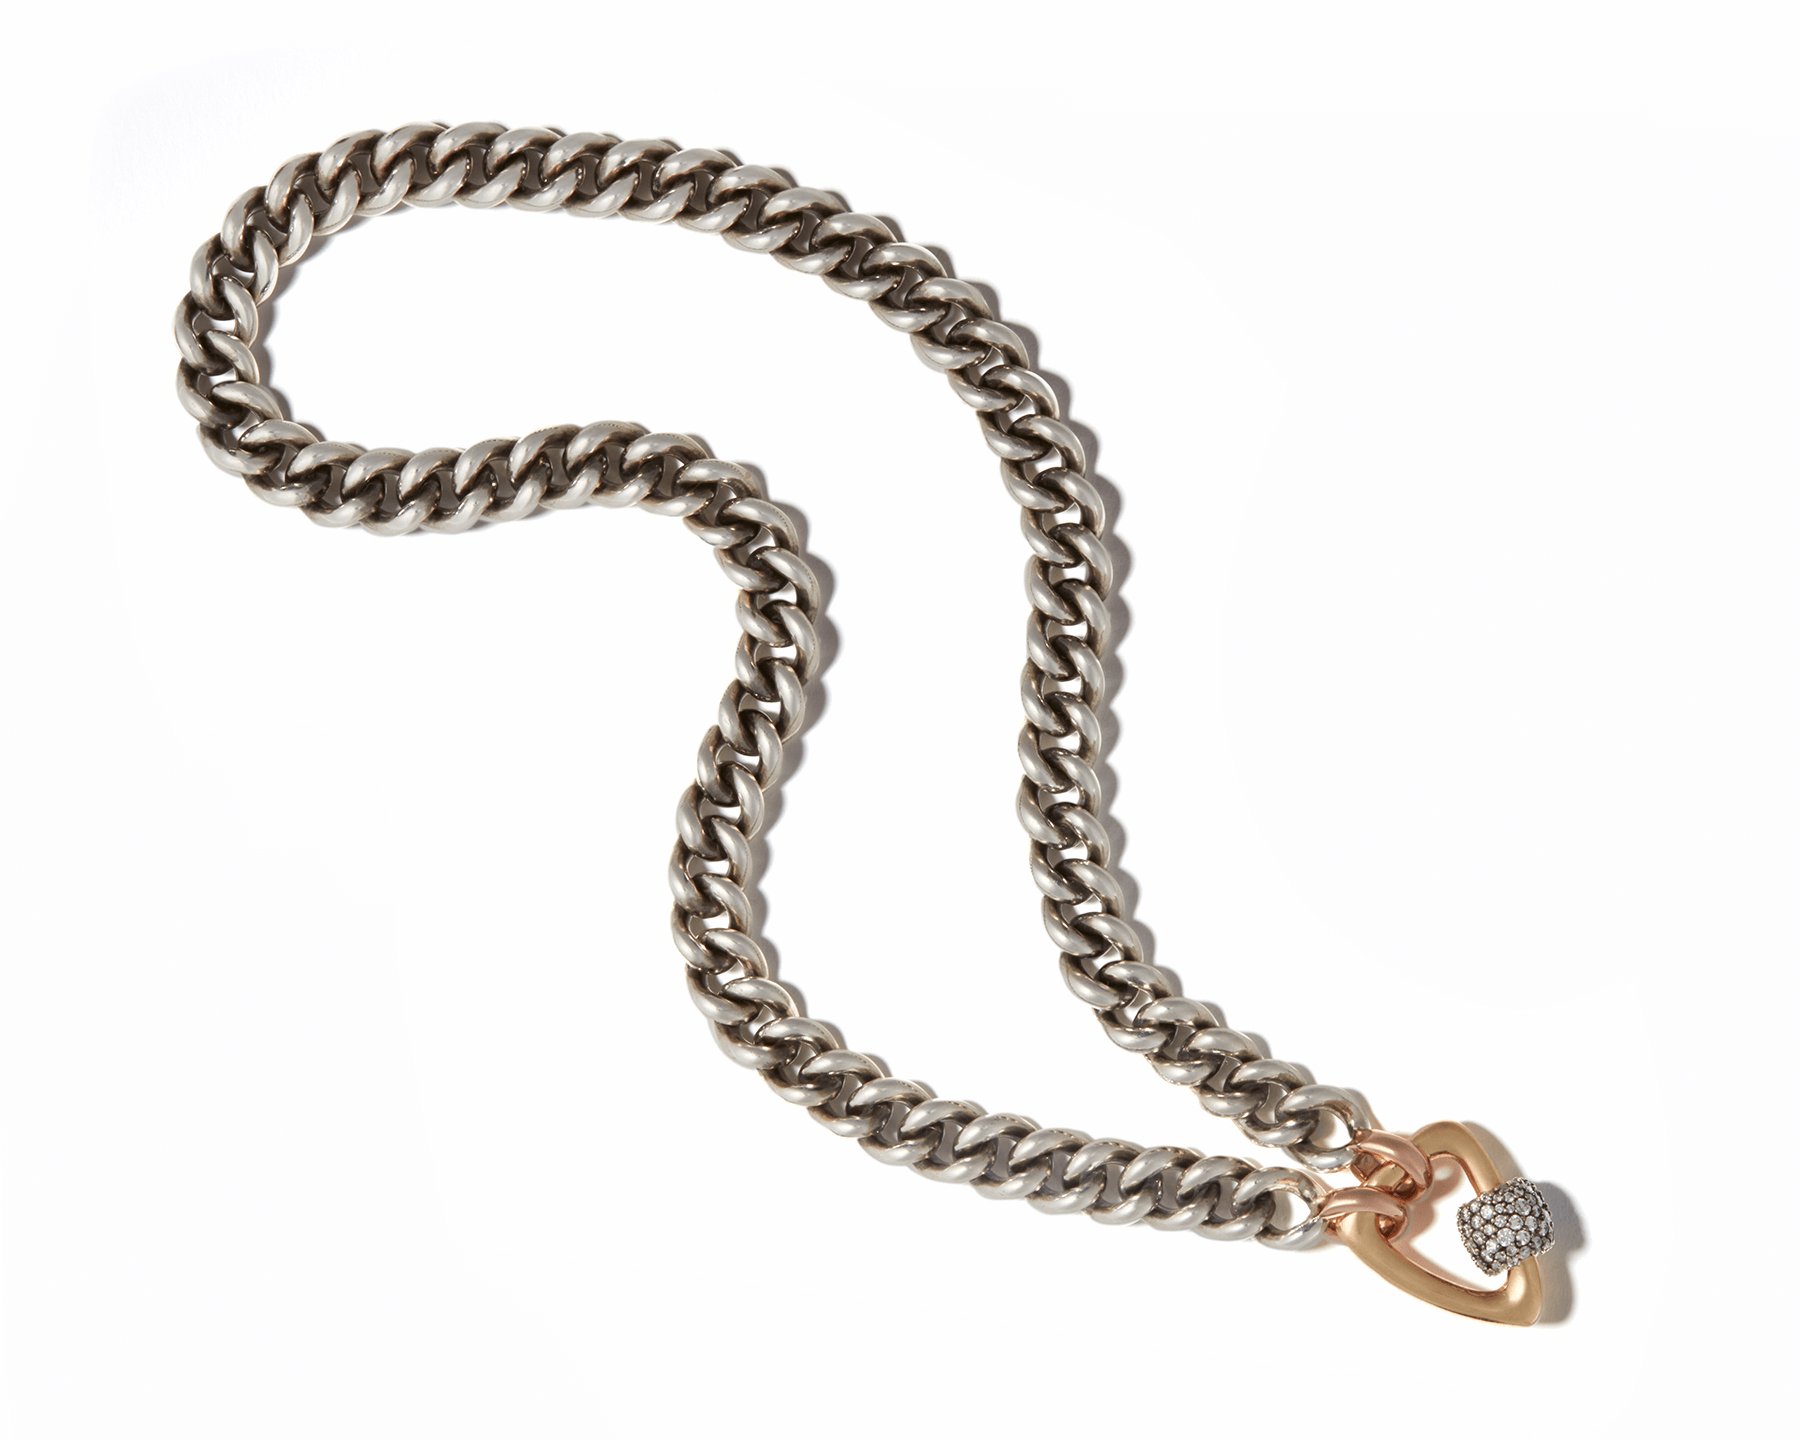 Silver curb chain necklace with gold triangle lock charm